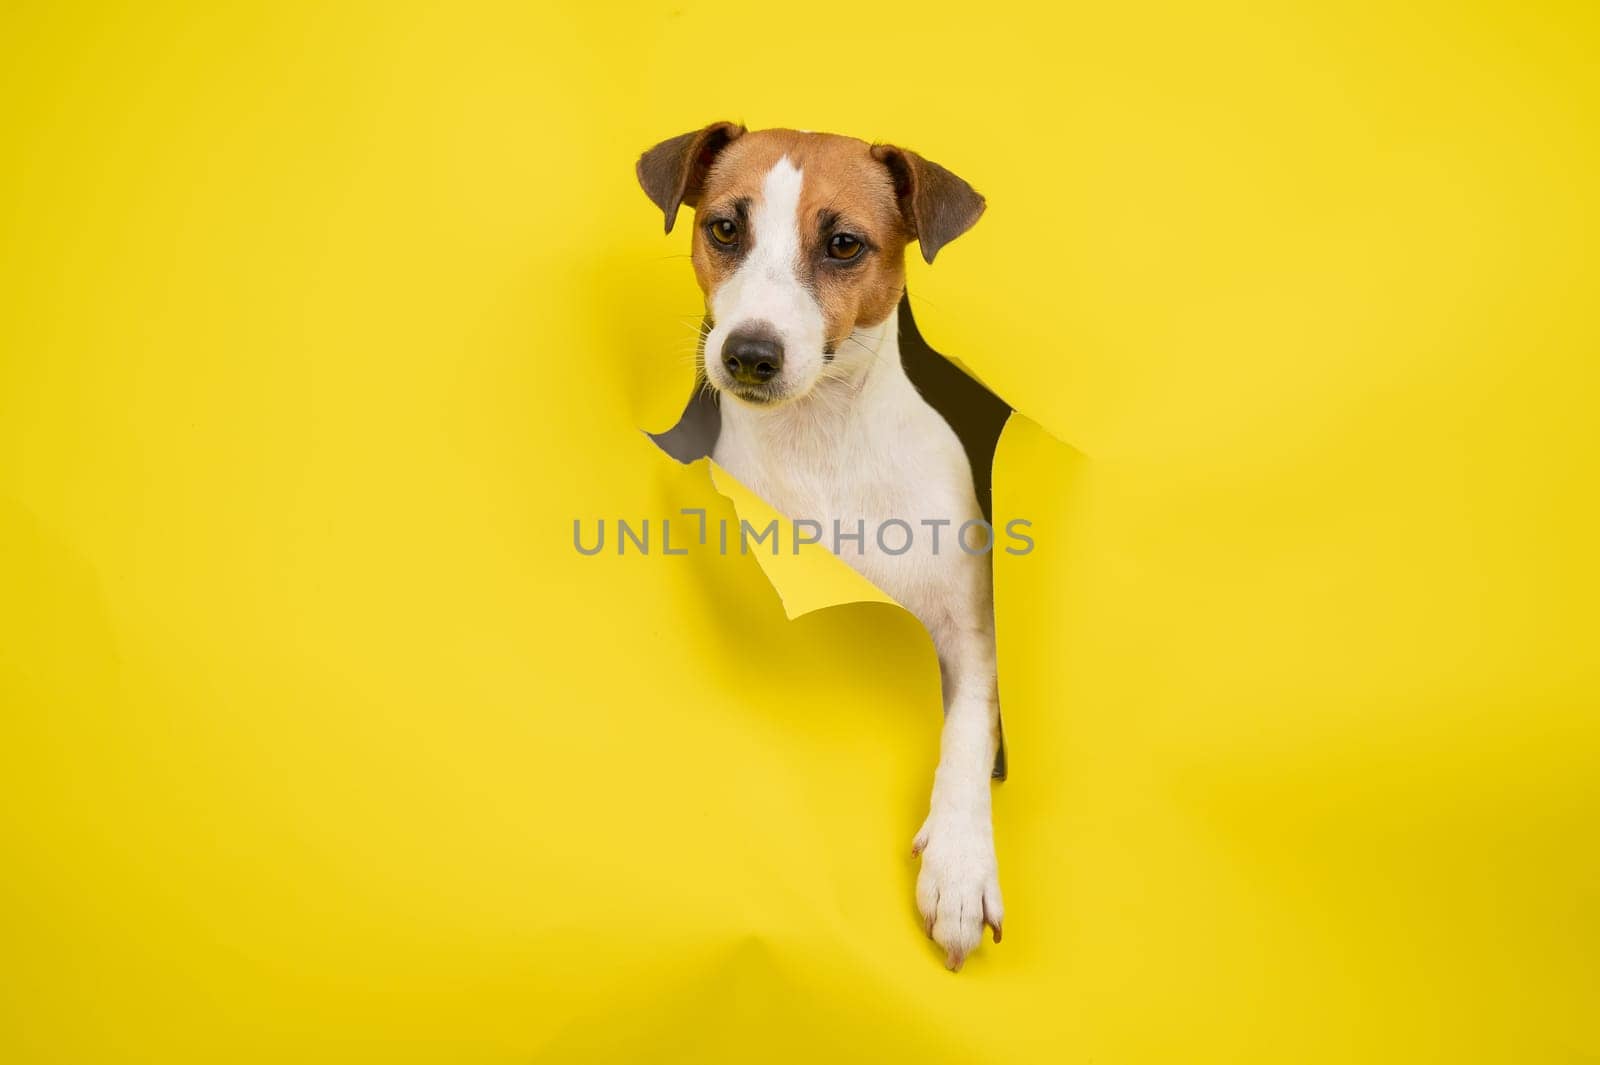 Cute Jack Russell Terrier dog tearing up yellow cardboard background. by mrwed54